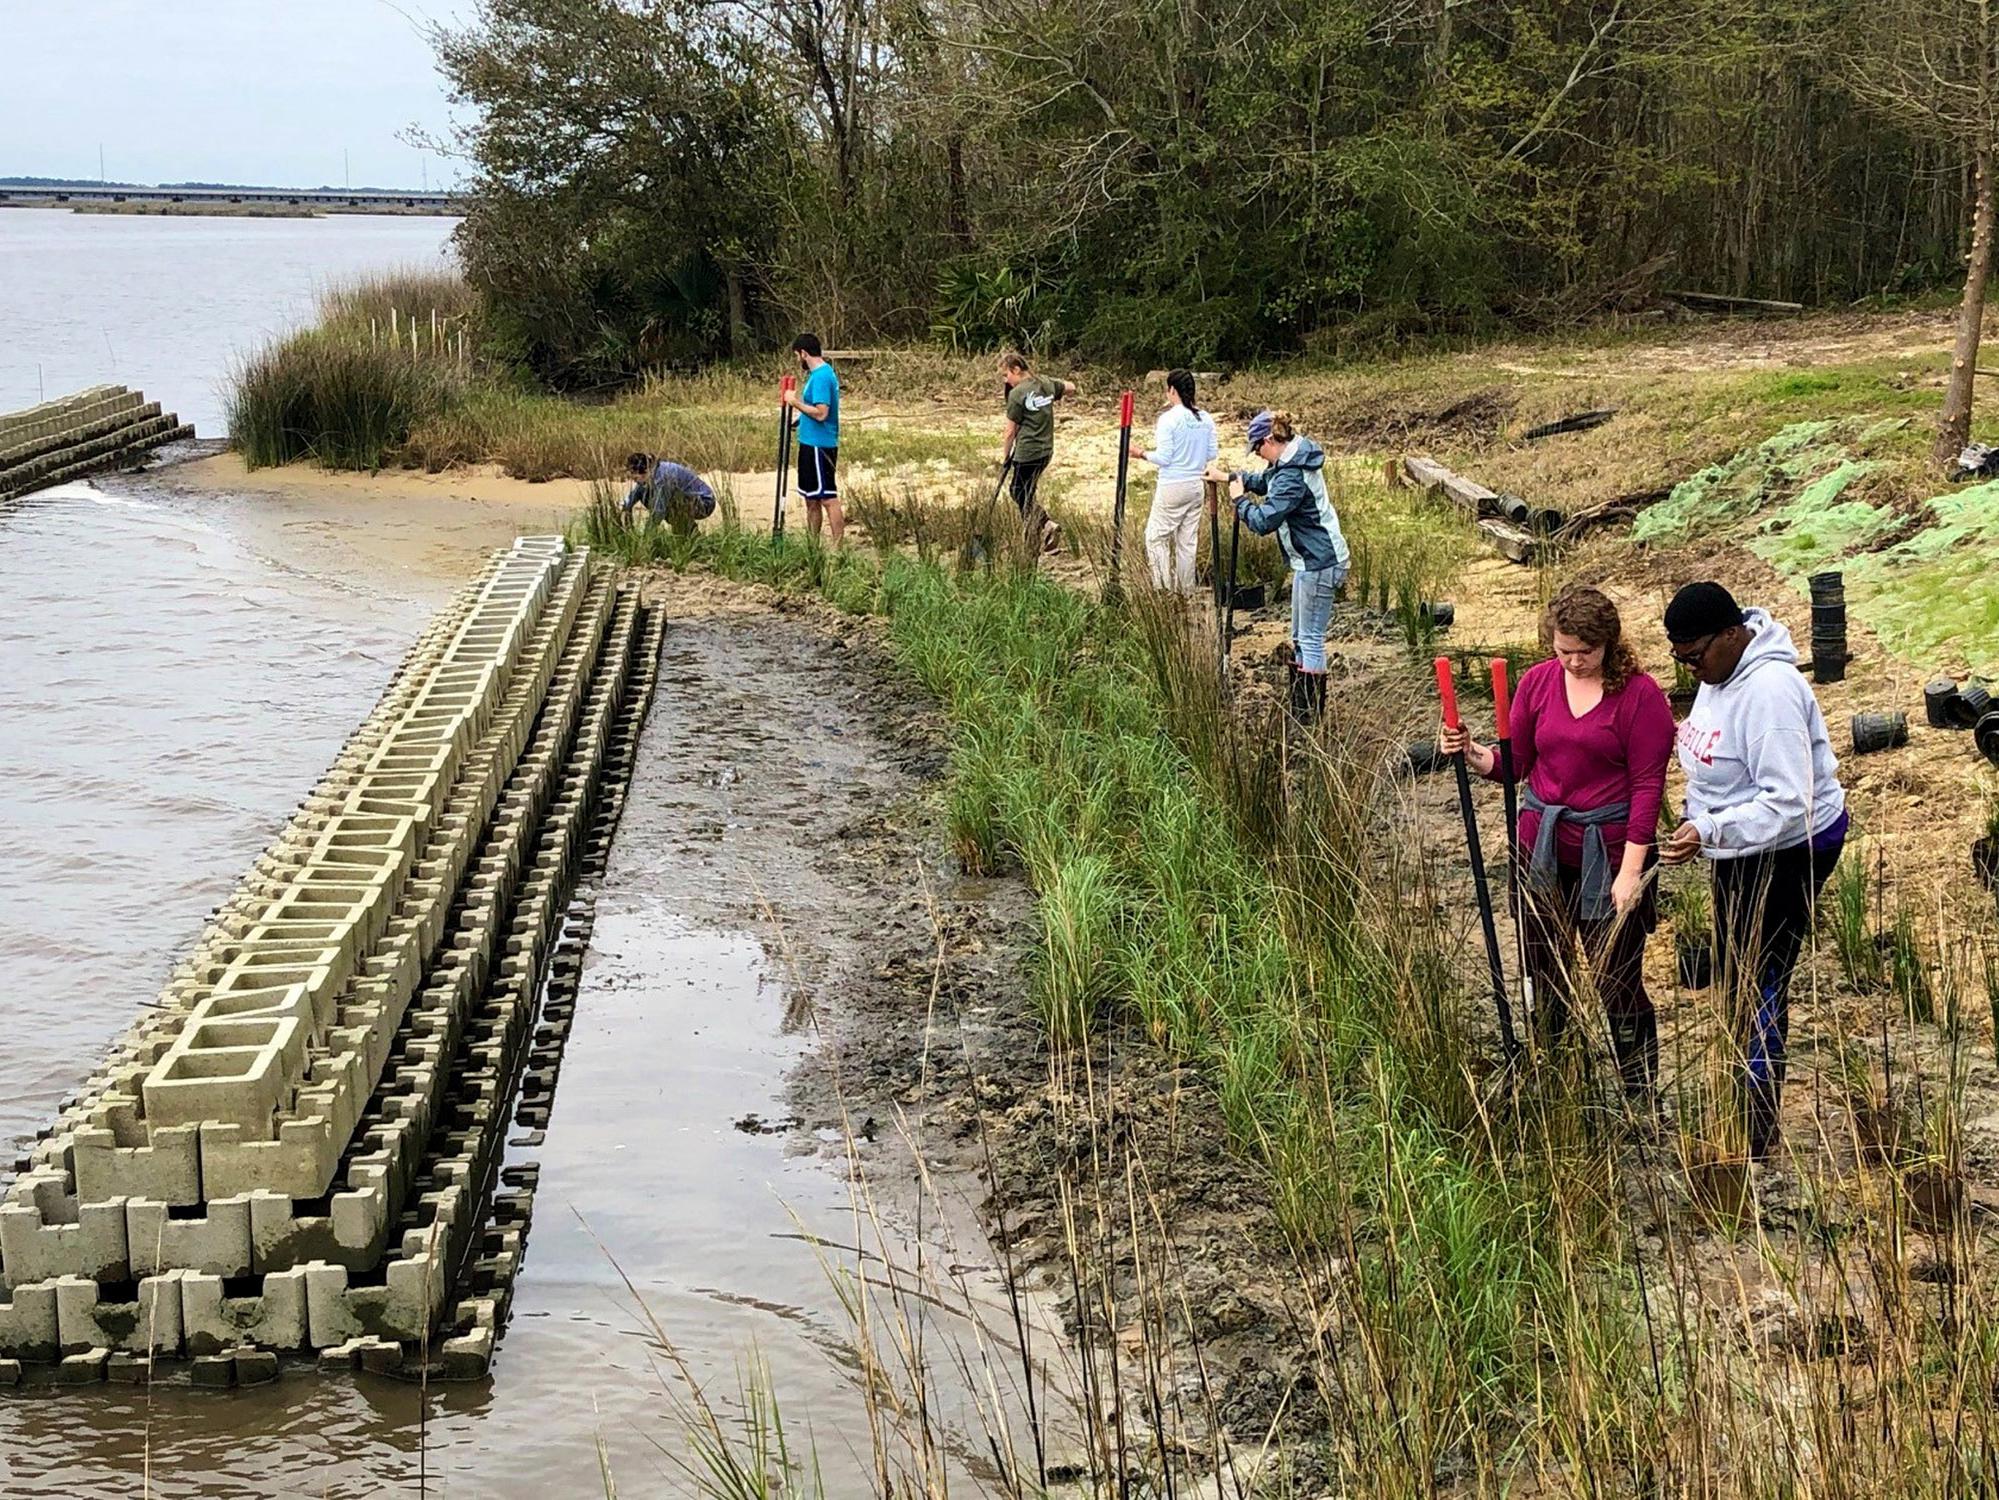 Seven people with garden shovels add grassy plants to a shoreline with large concrete bricks forming a long narrow formation in the water just off the shore.